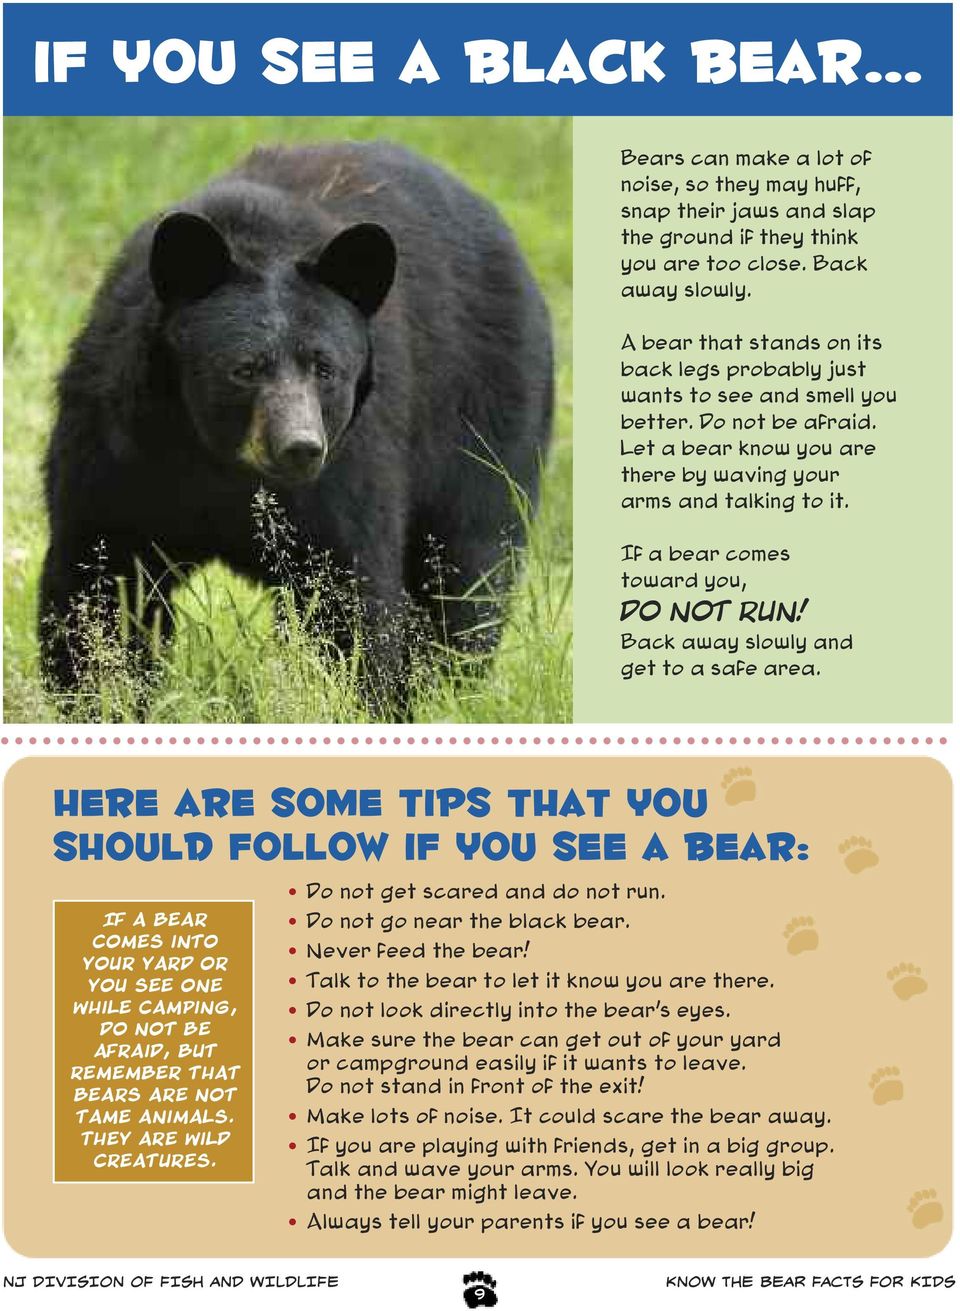 If a bear comes toward you, DO NOT RUN! Back away slowly and get to a safe area.